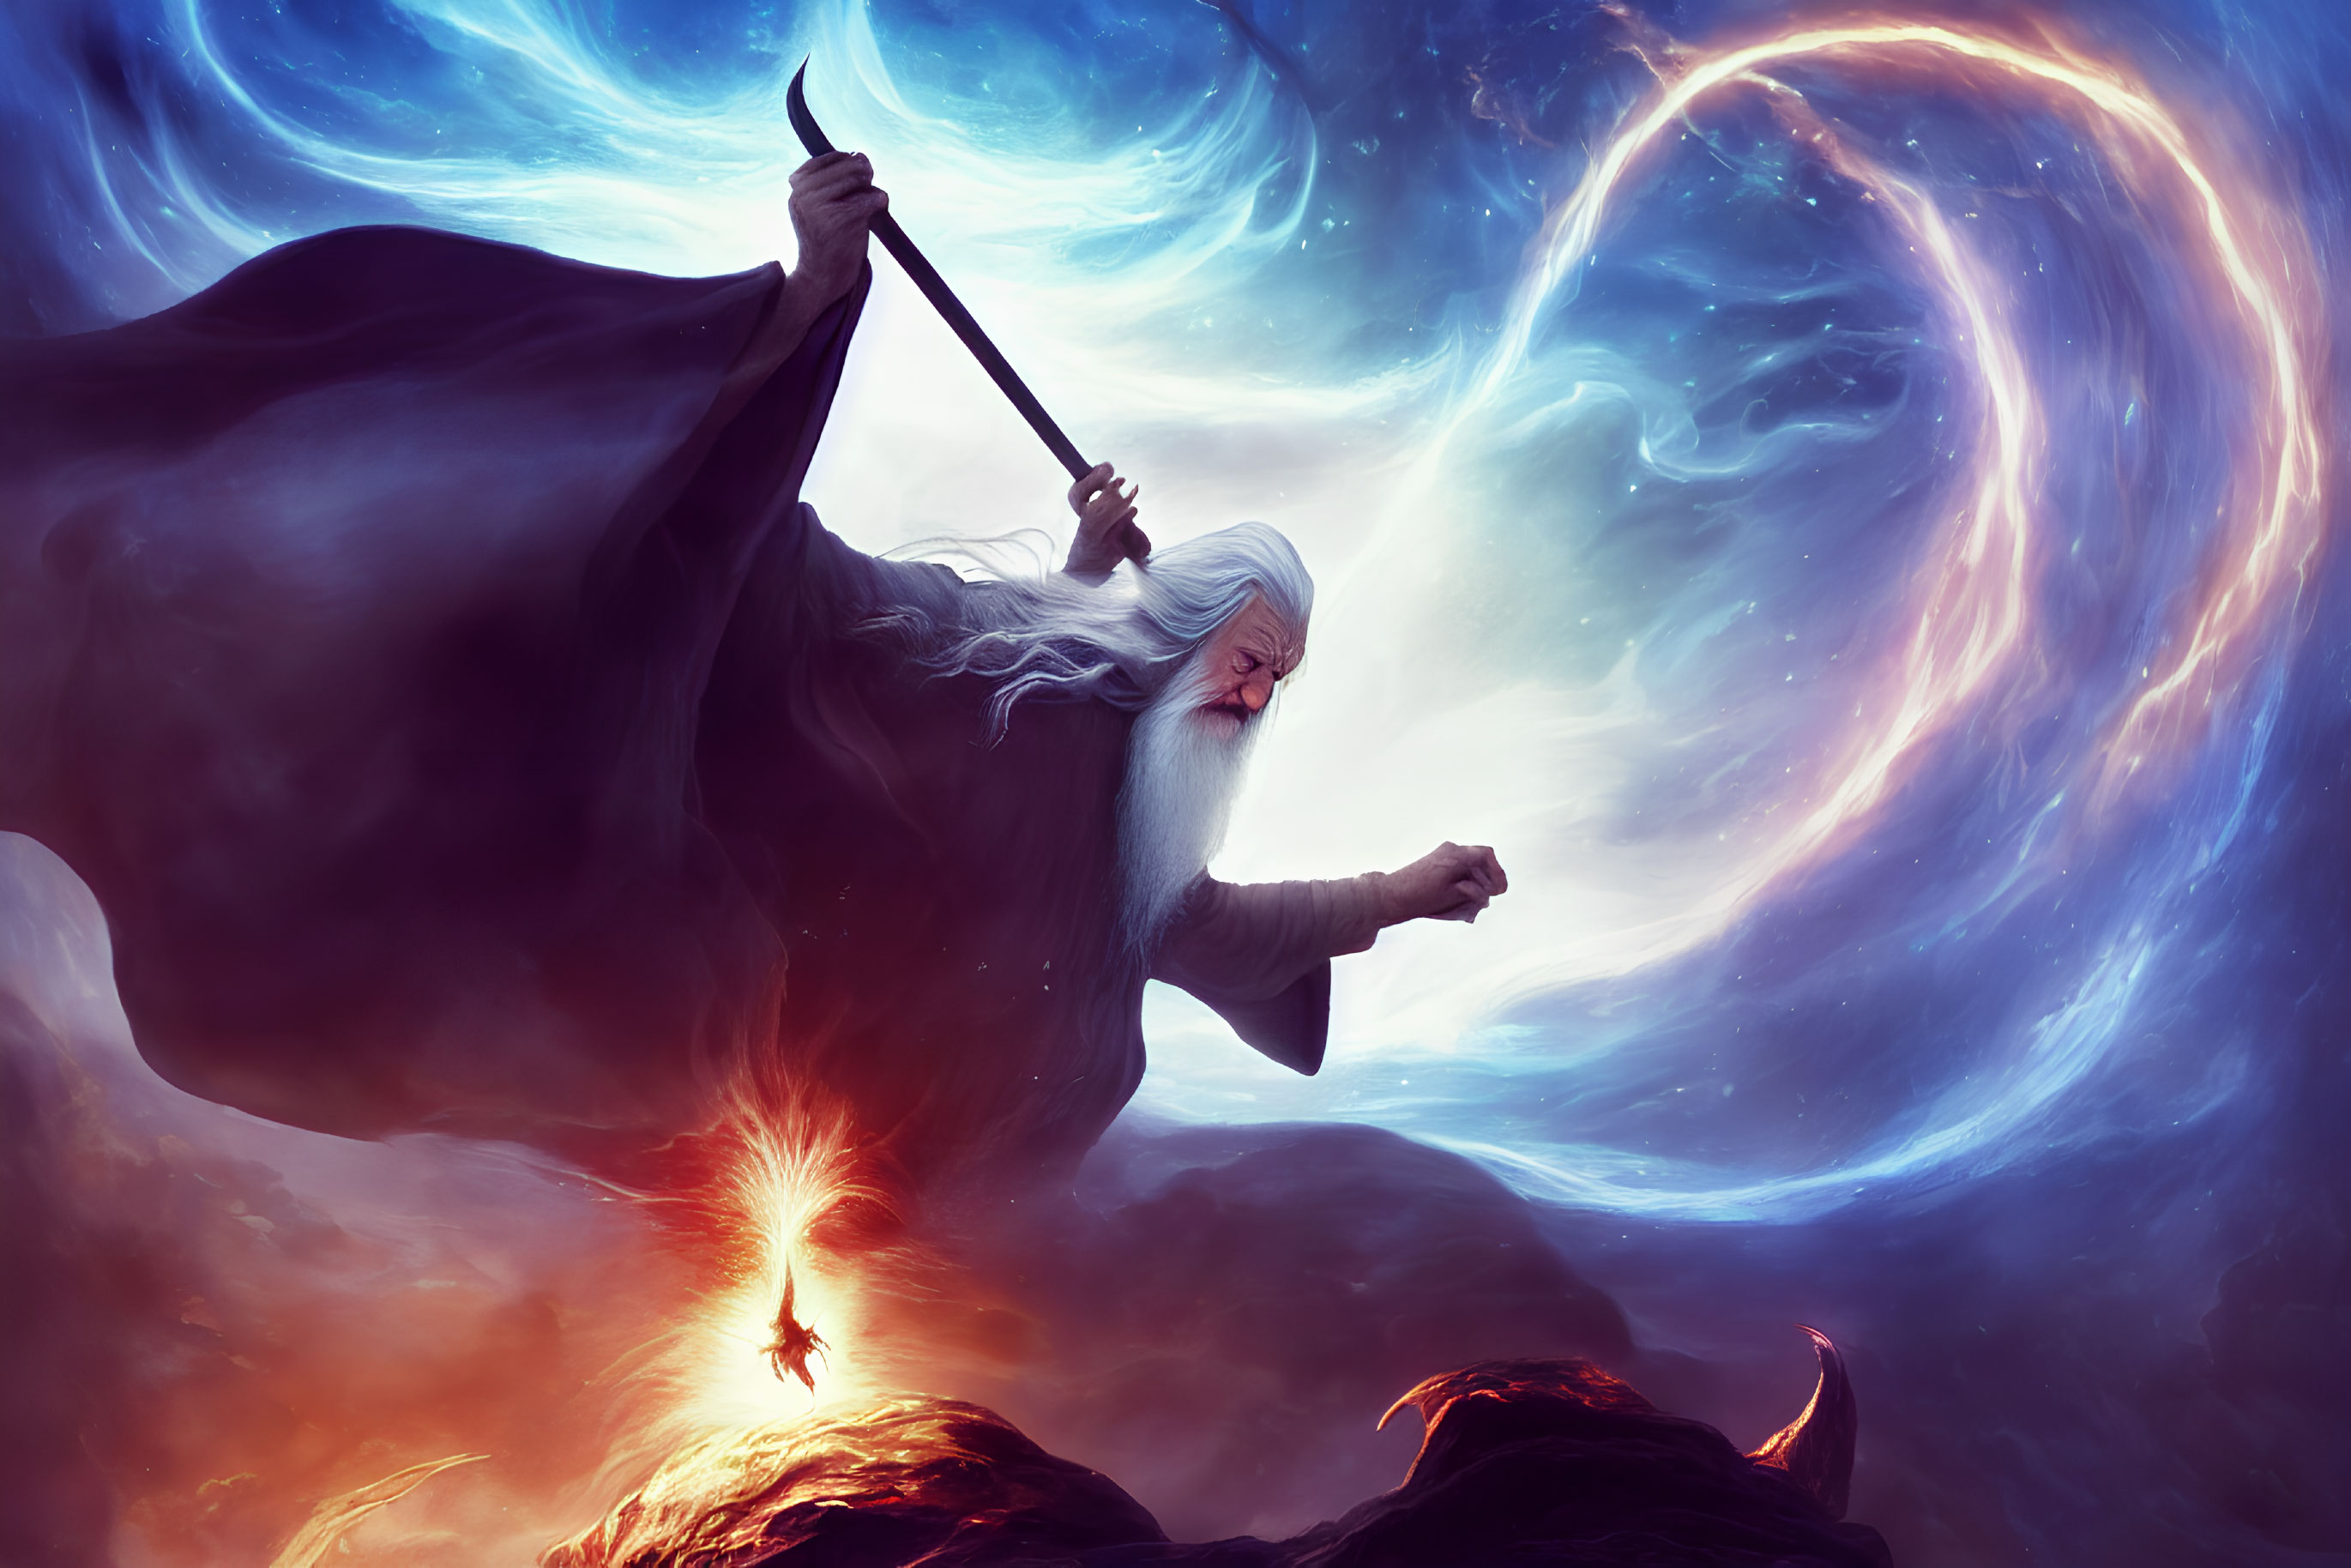 Wizard with long beard and staff on rocky outcrop with cosmic energy.